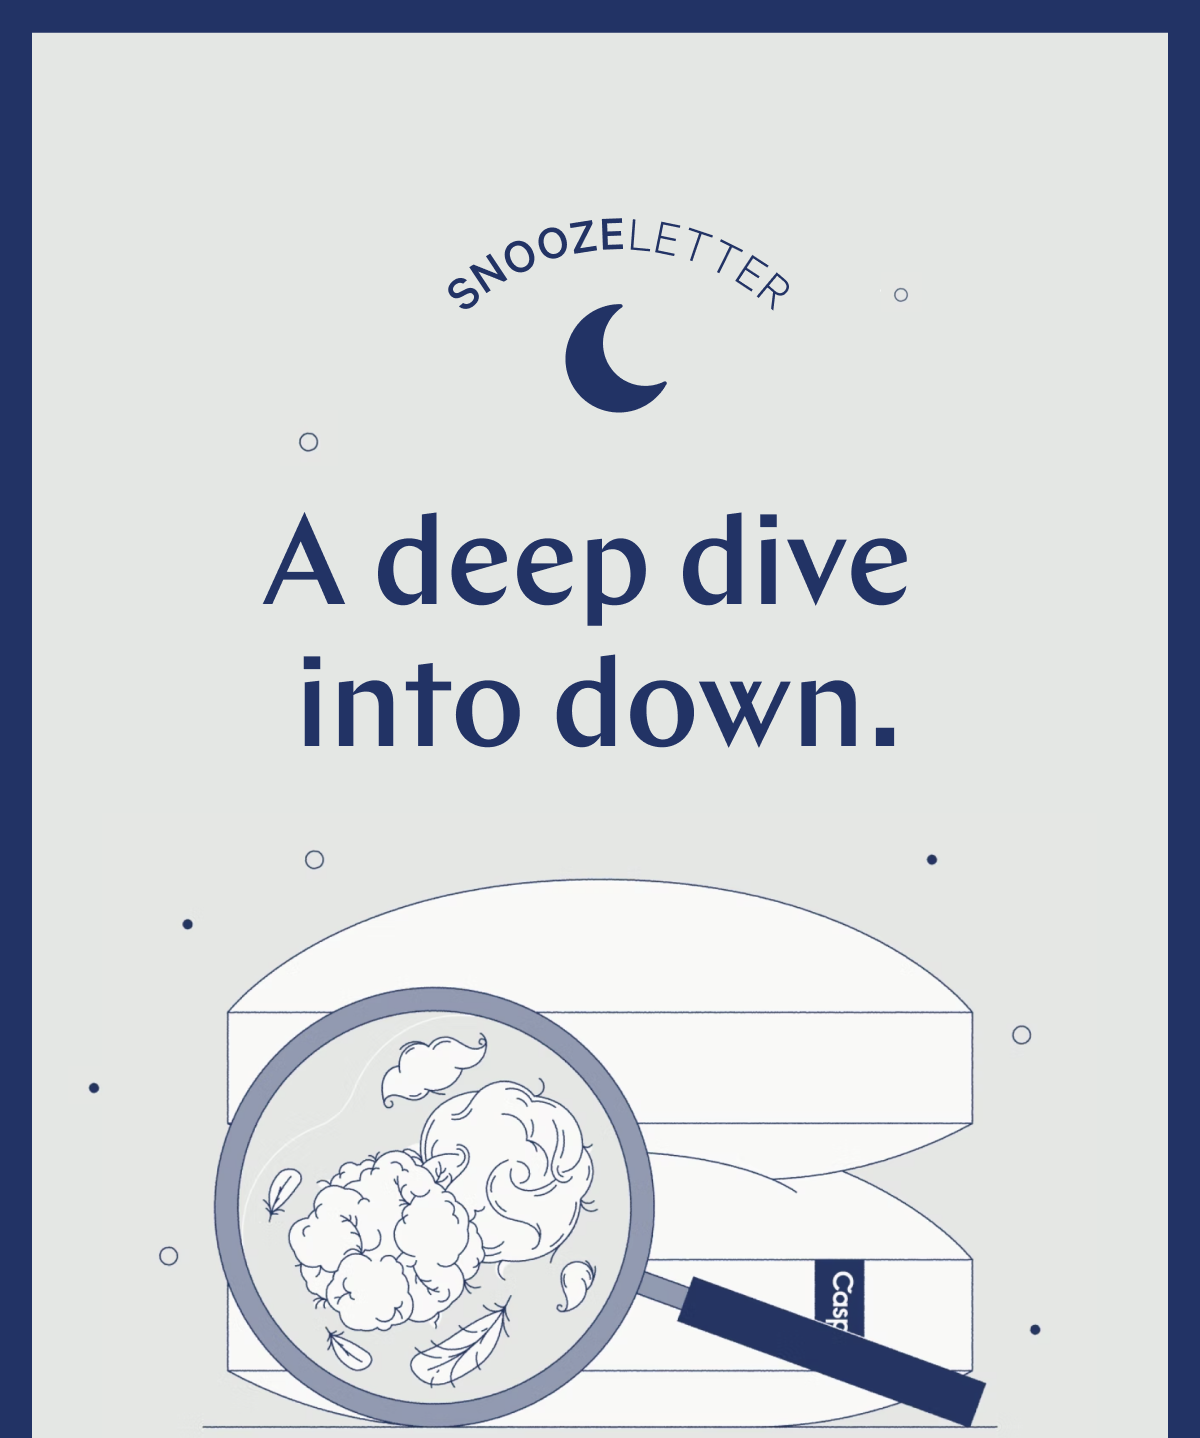 SNOOZELETTER >> A deep dive into down. >>